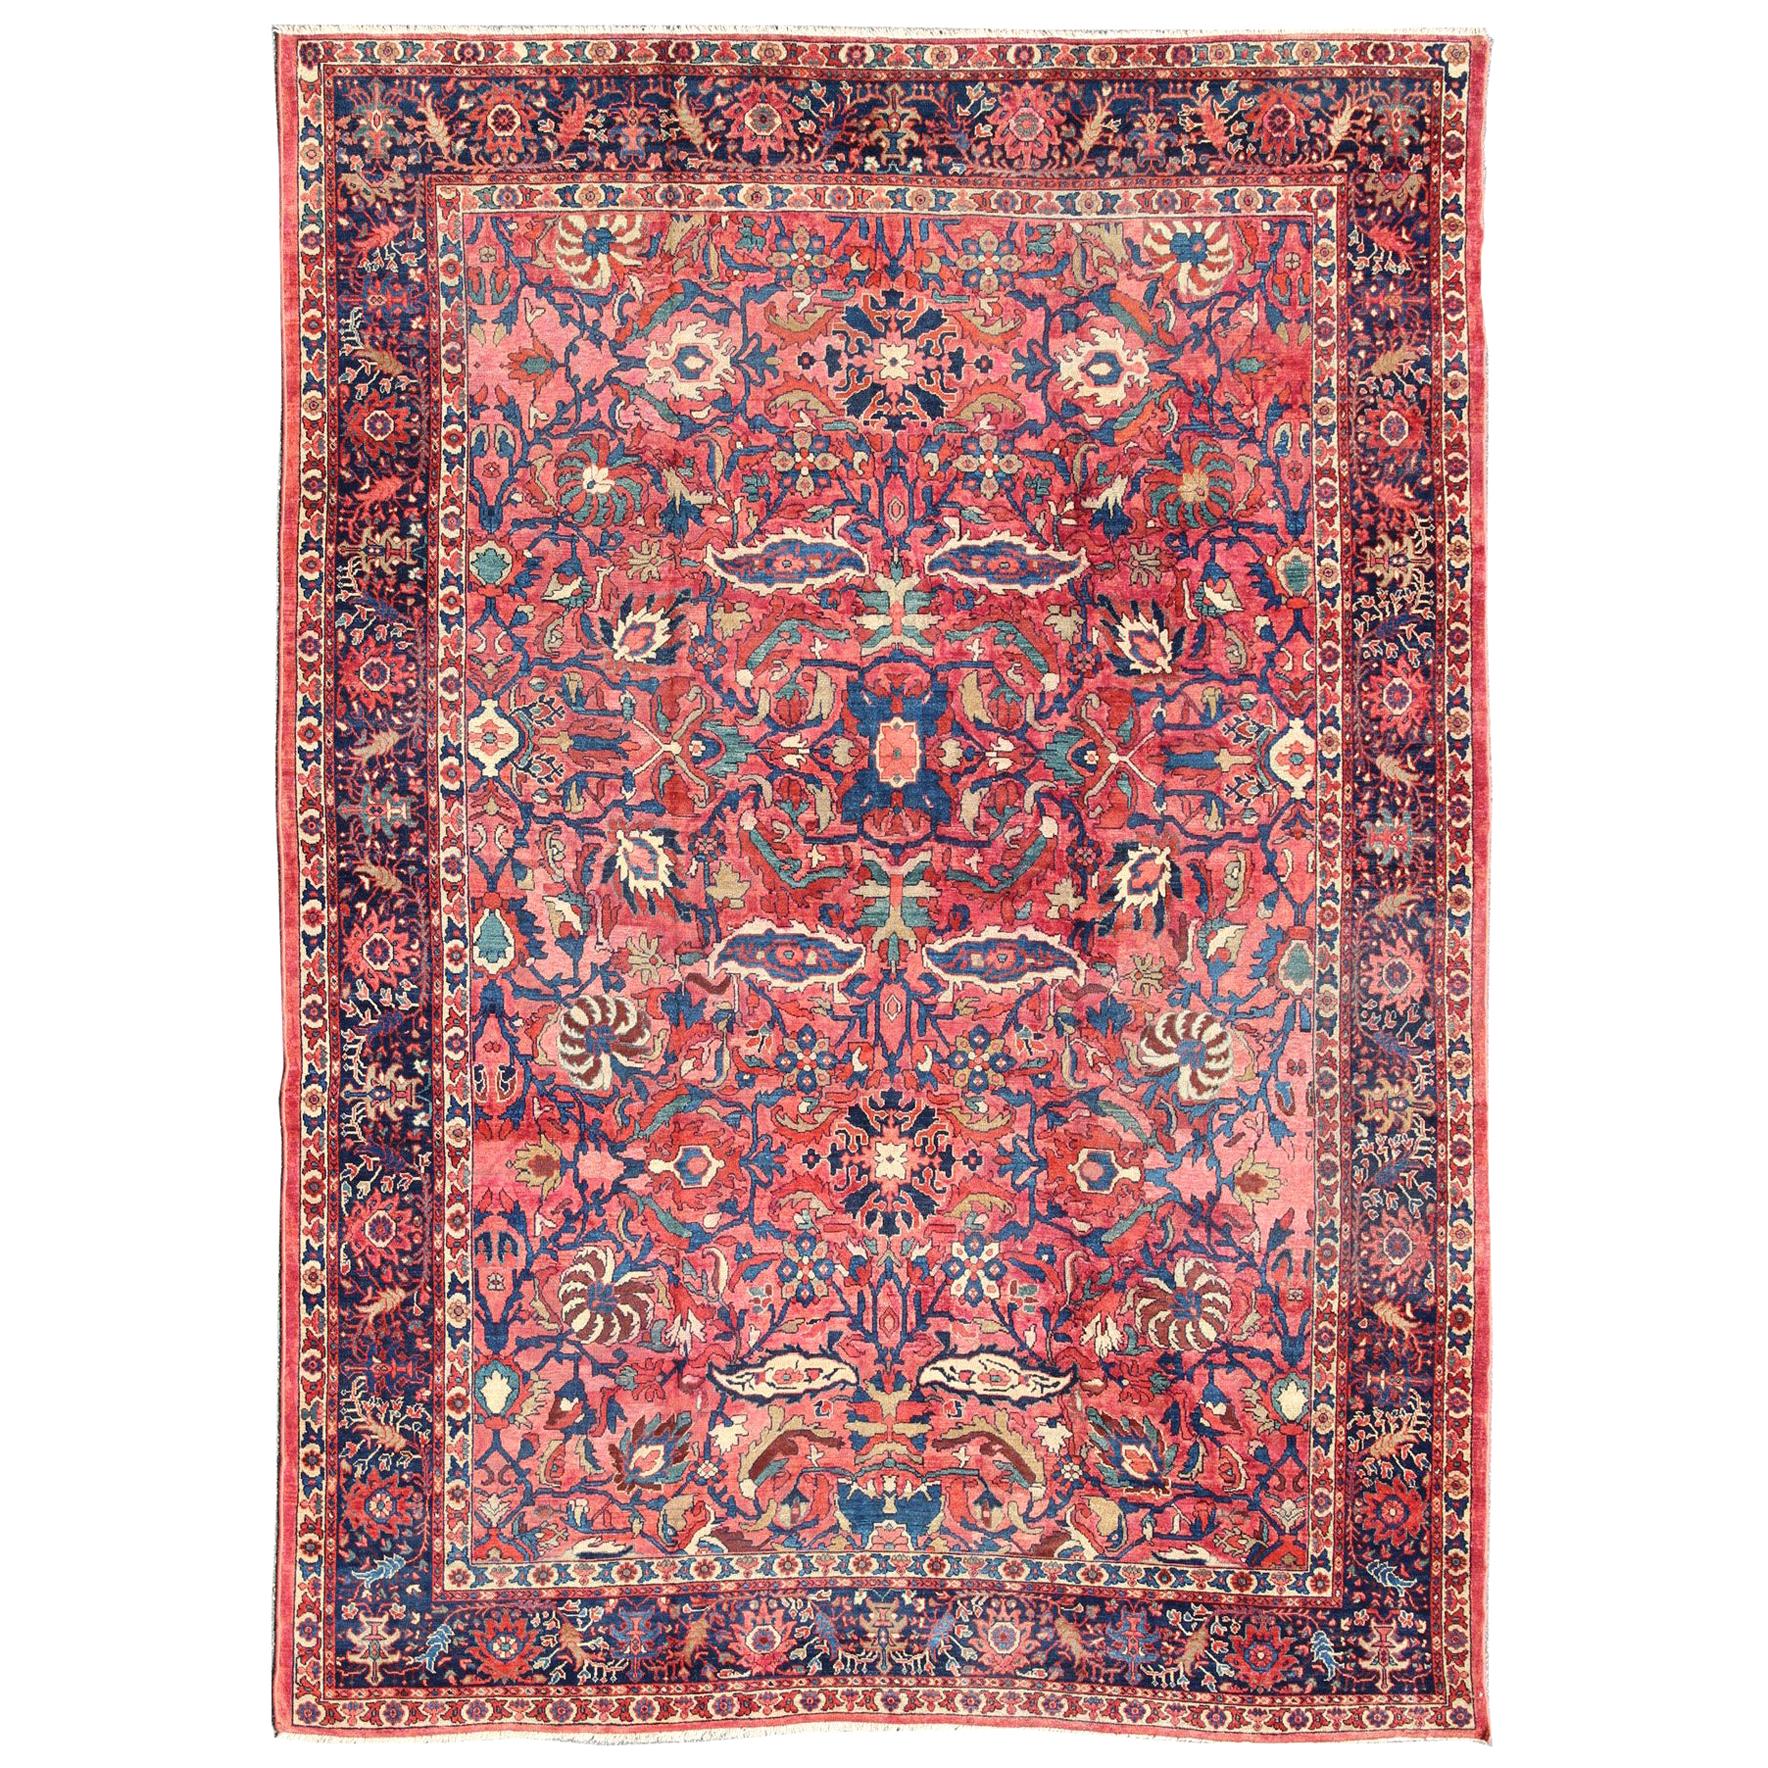 Large Antique Persian Sultanabad Rug with Large Palmettes in Rose Red and Blue